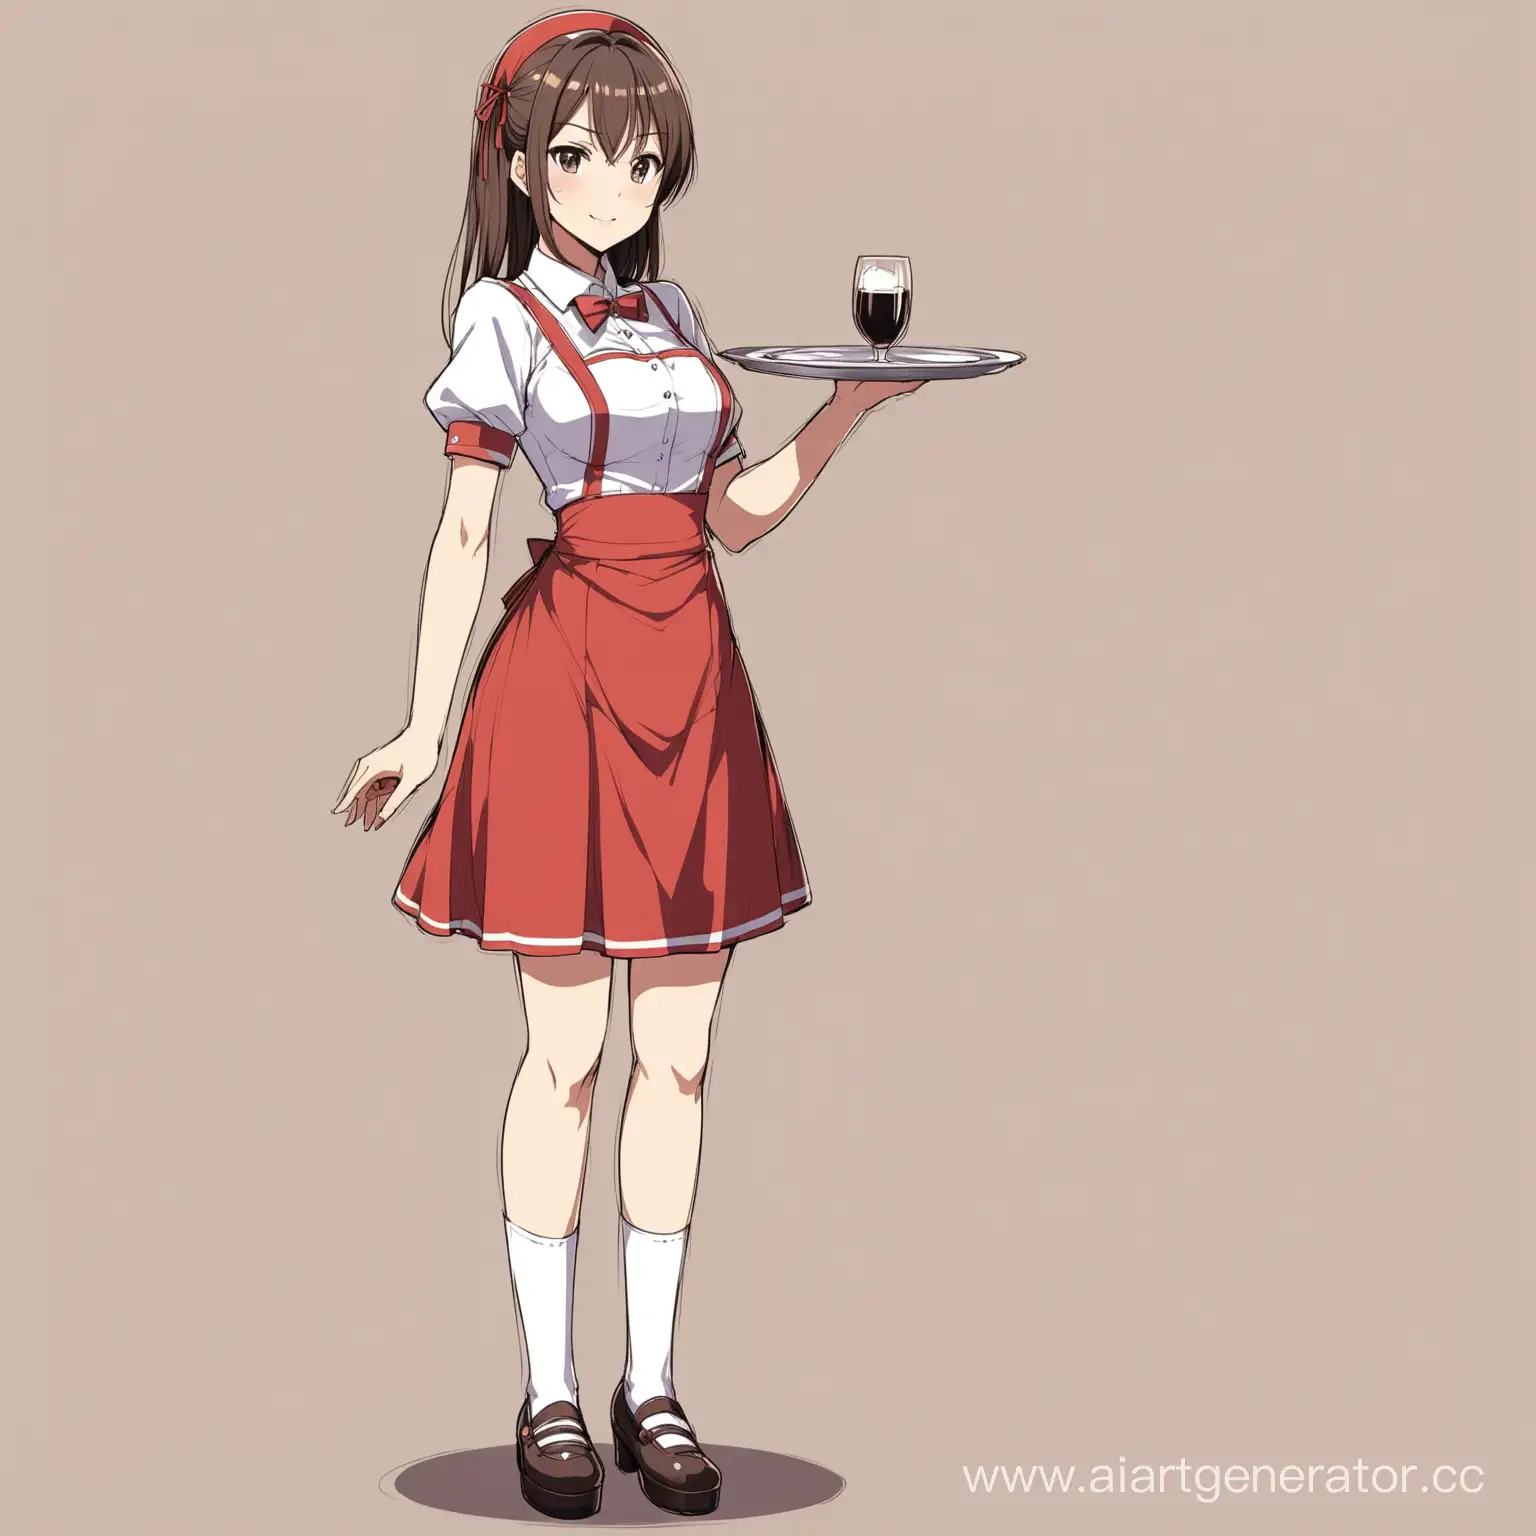 AnimeStyle-Waitress-Serving-with-Grace-and-Elegance